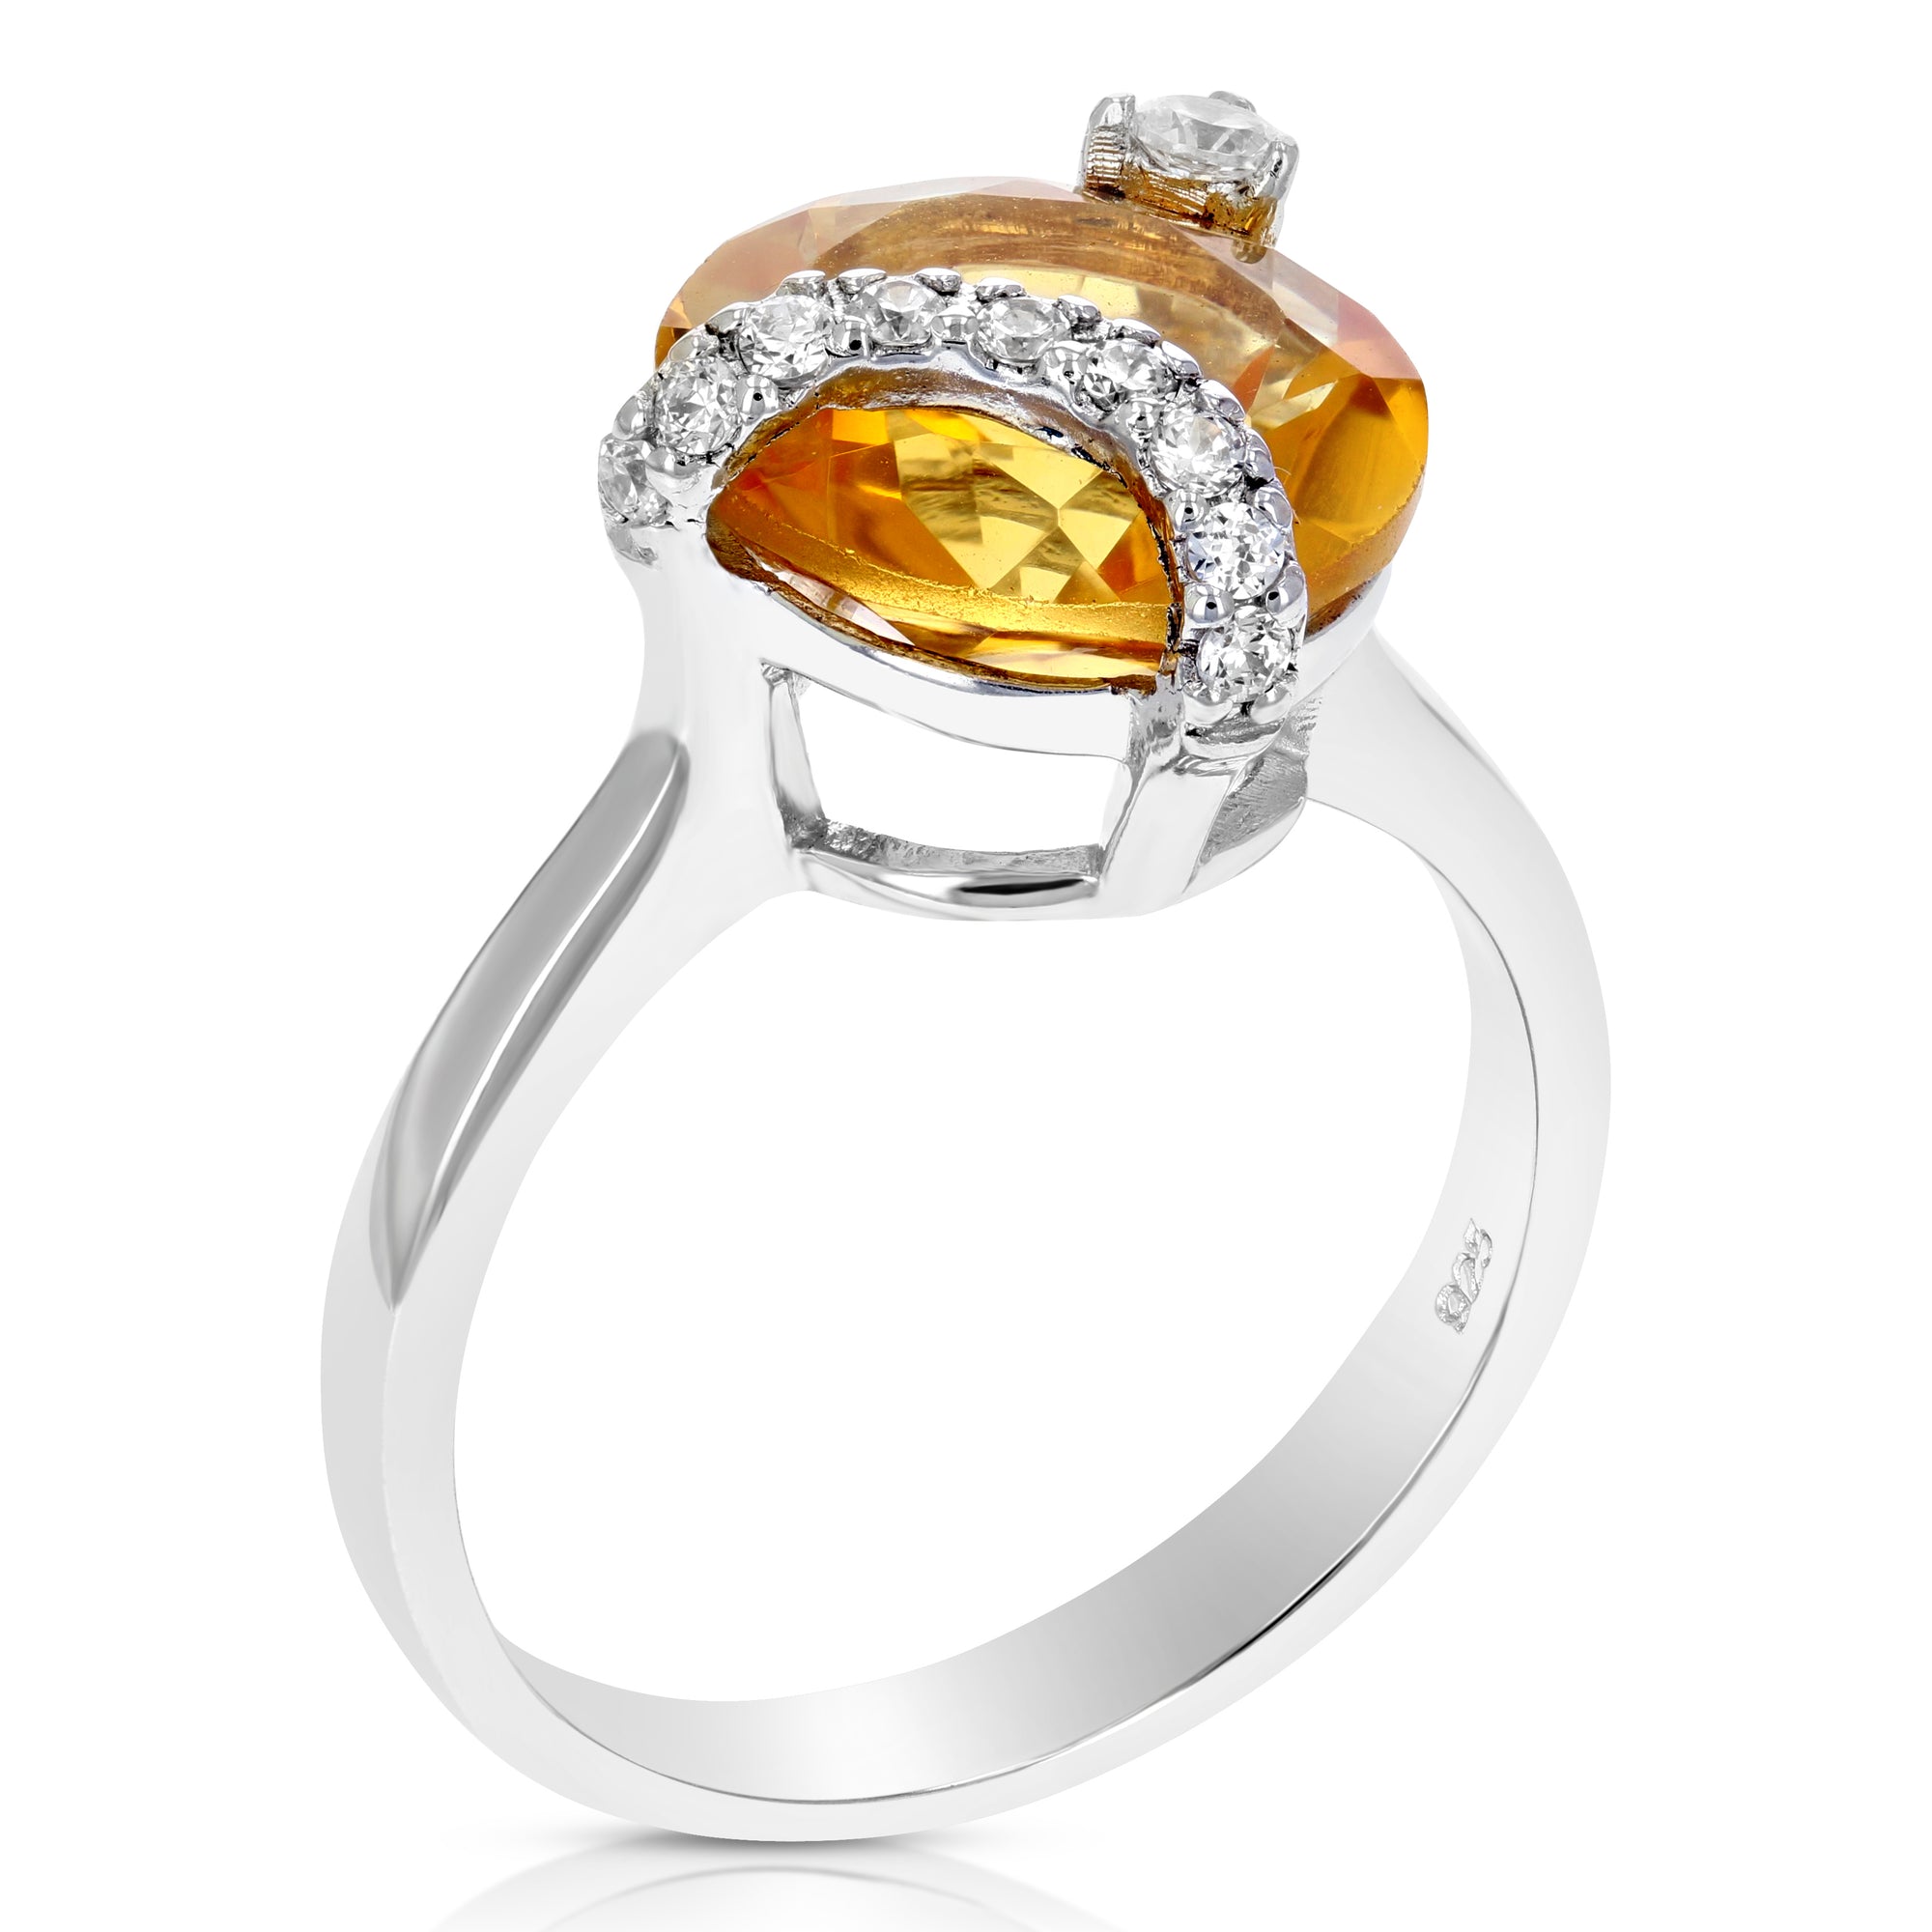 4 cttw Citrine Ring .925 Sterling Silver with Rhodium Plating Round Shape 11 MM